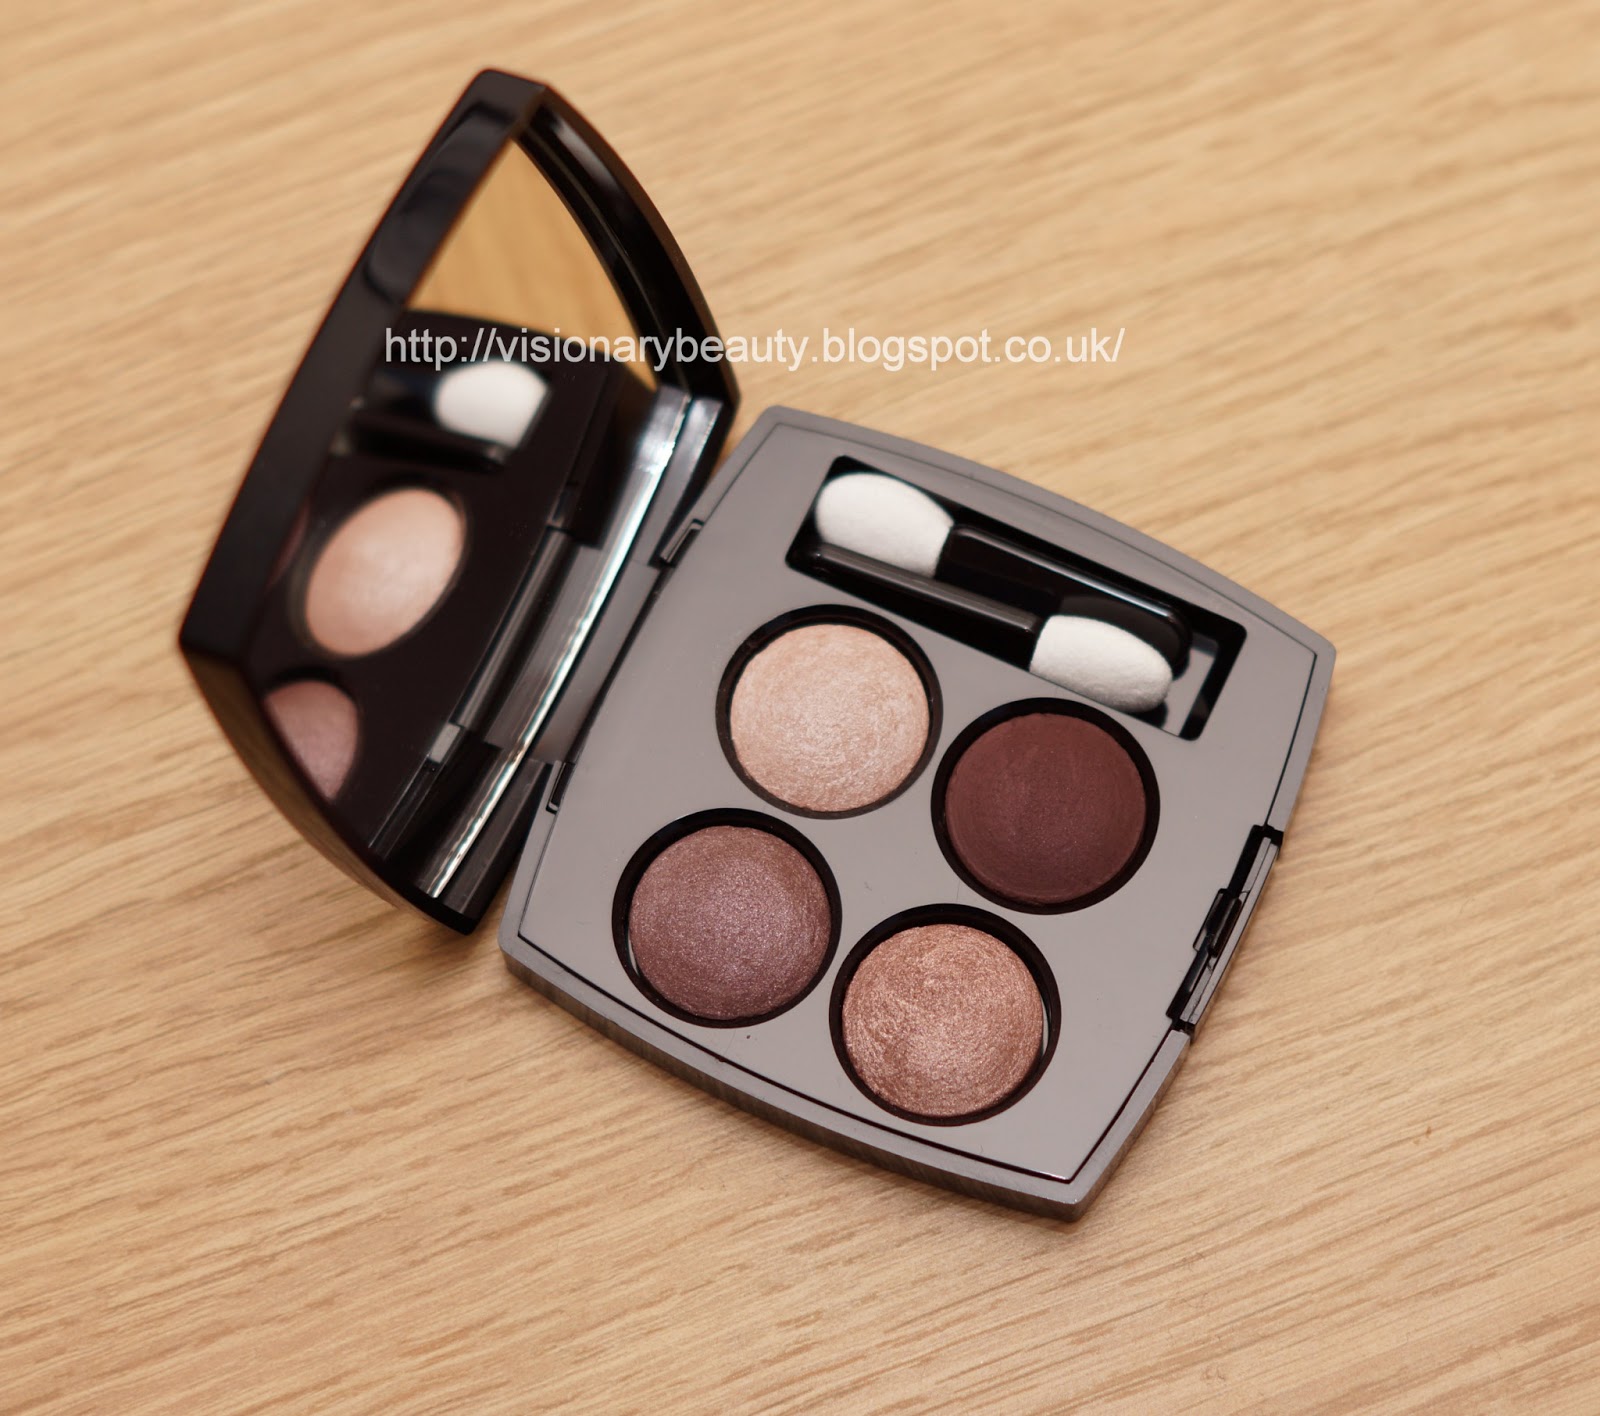 Jayded Dreaming Beauty Blog : 39 RAFFINEMENT CHANEL LES 4 OMBRES QUADRA EYE  SHADOW - SWATCHES AND REVIEW